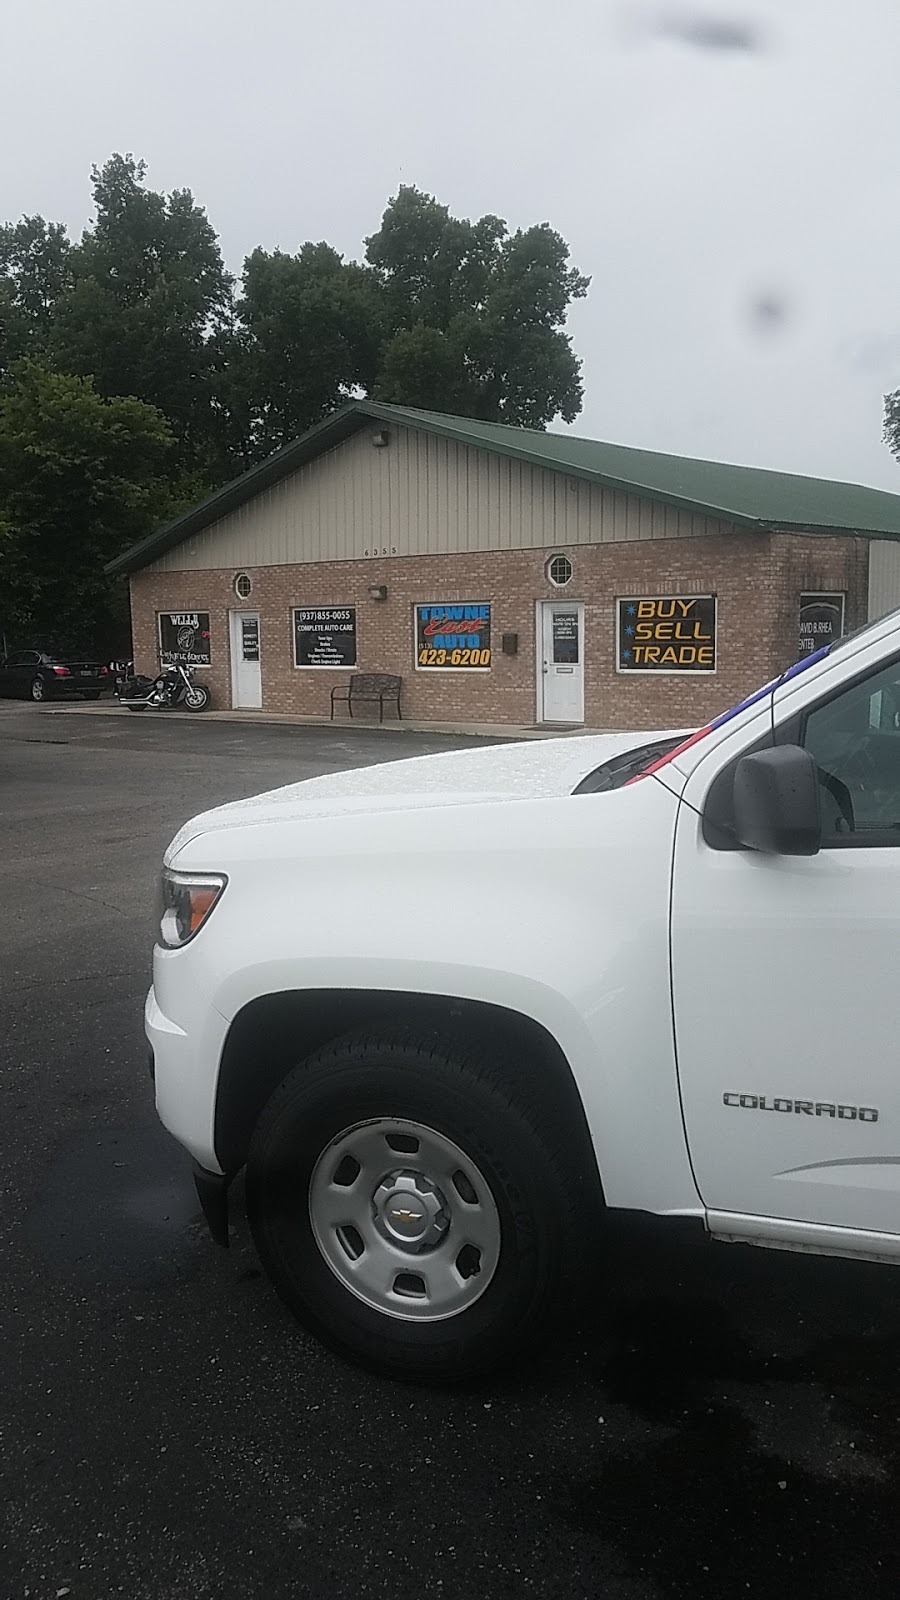 Towne East Auto | 6355 Germantown Rd, Middletown, OH 45042, USA | Phone: (513) 423-6200